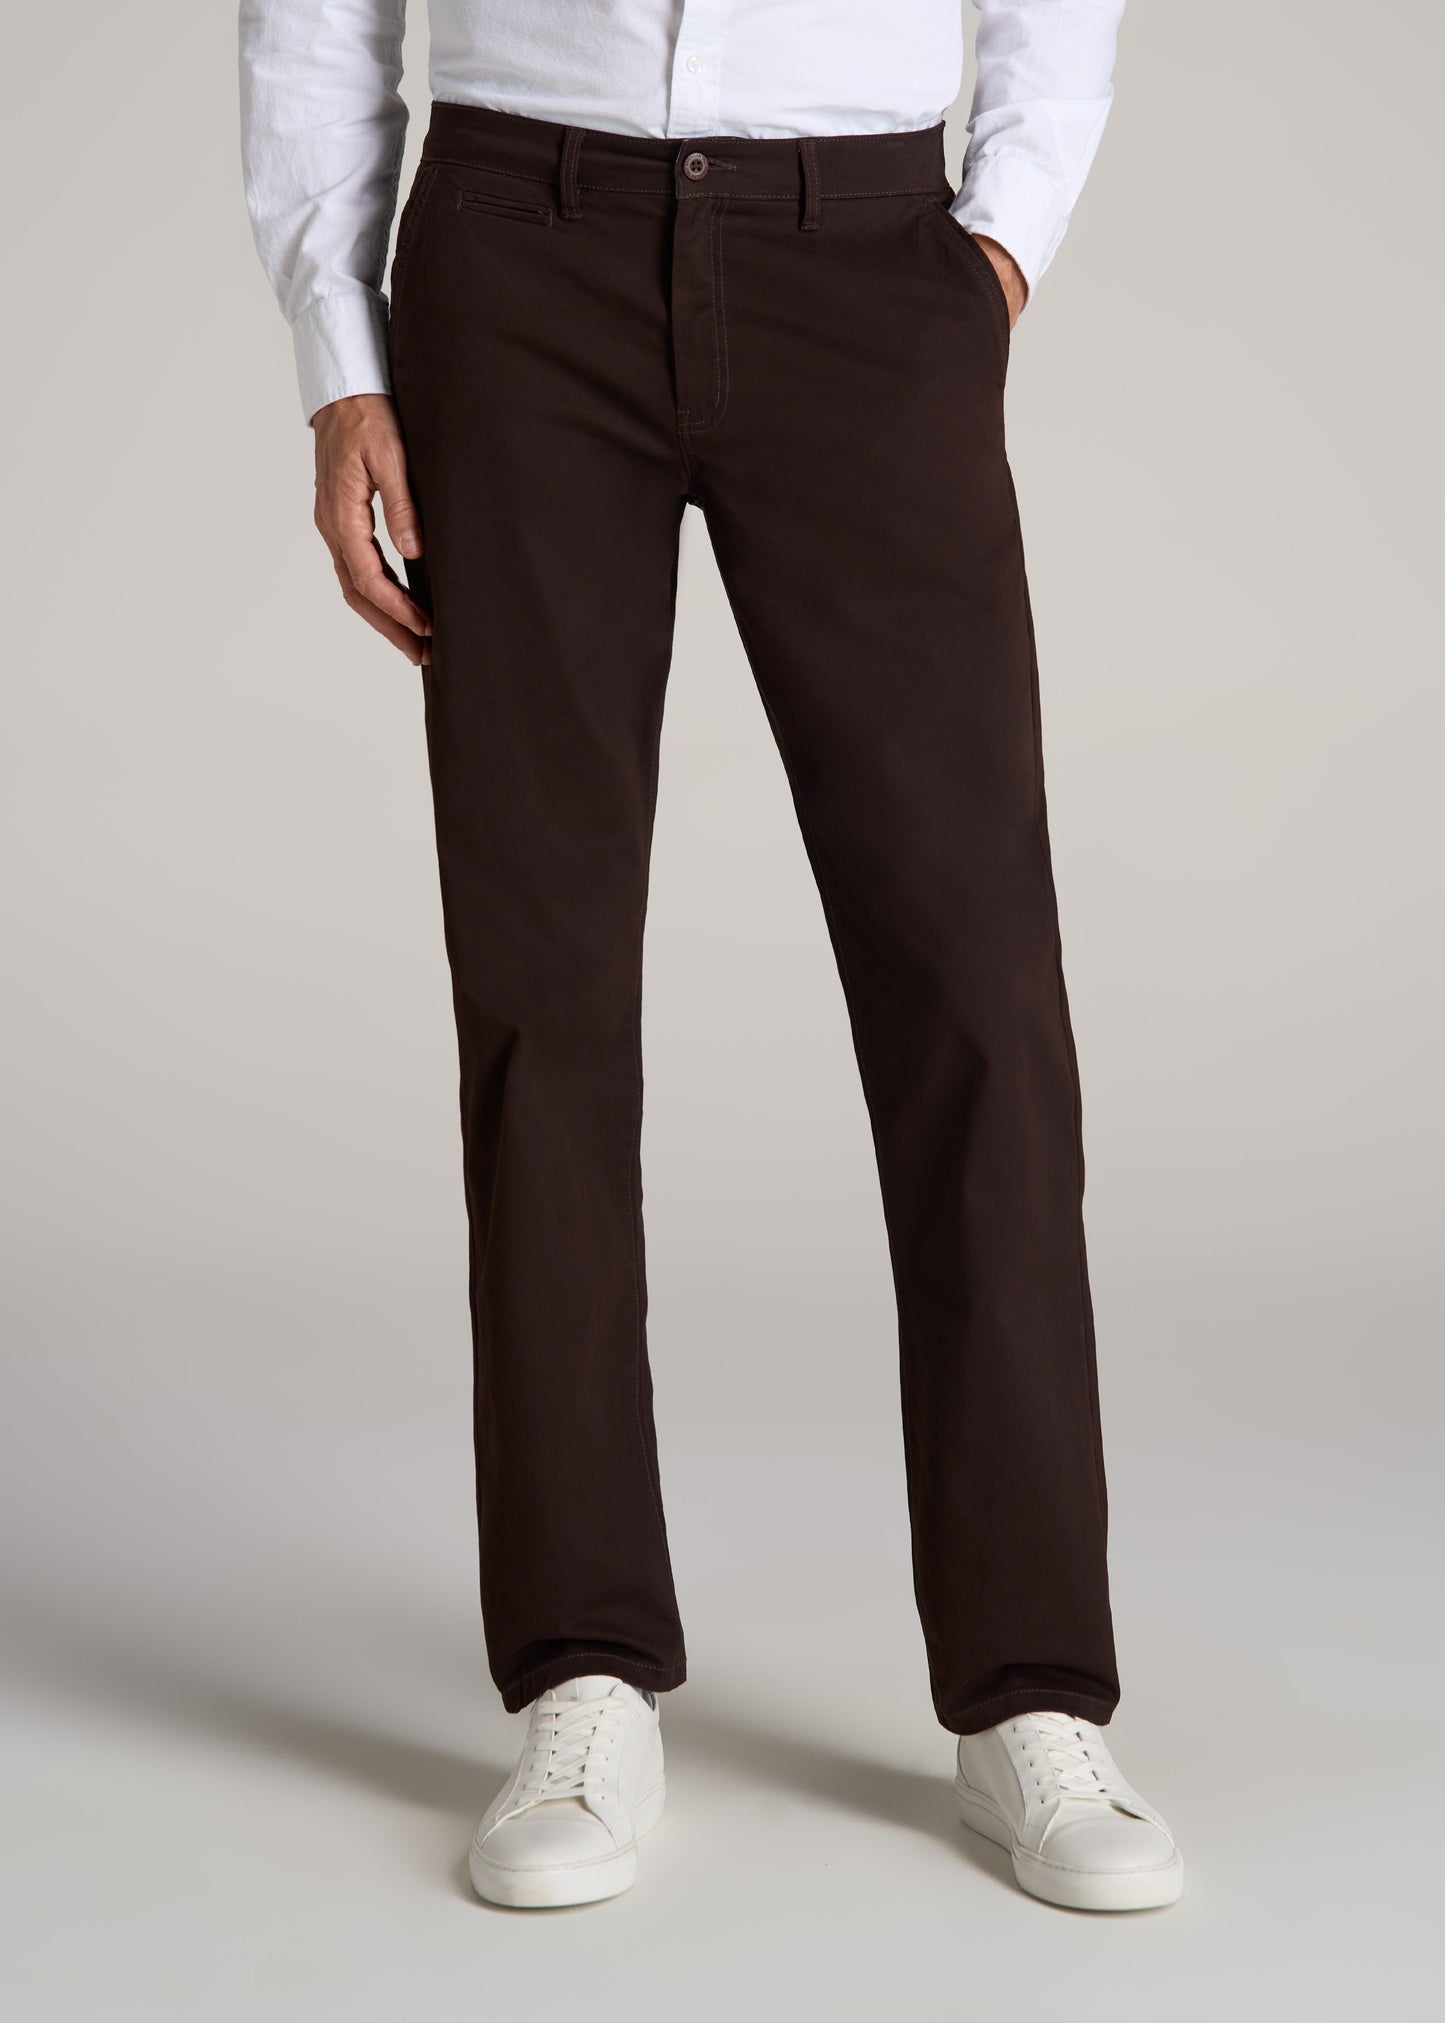 American-Tall-Men-J1-Straight-Fit-Chino-Pant-Chocolate-front